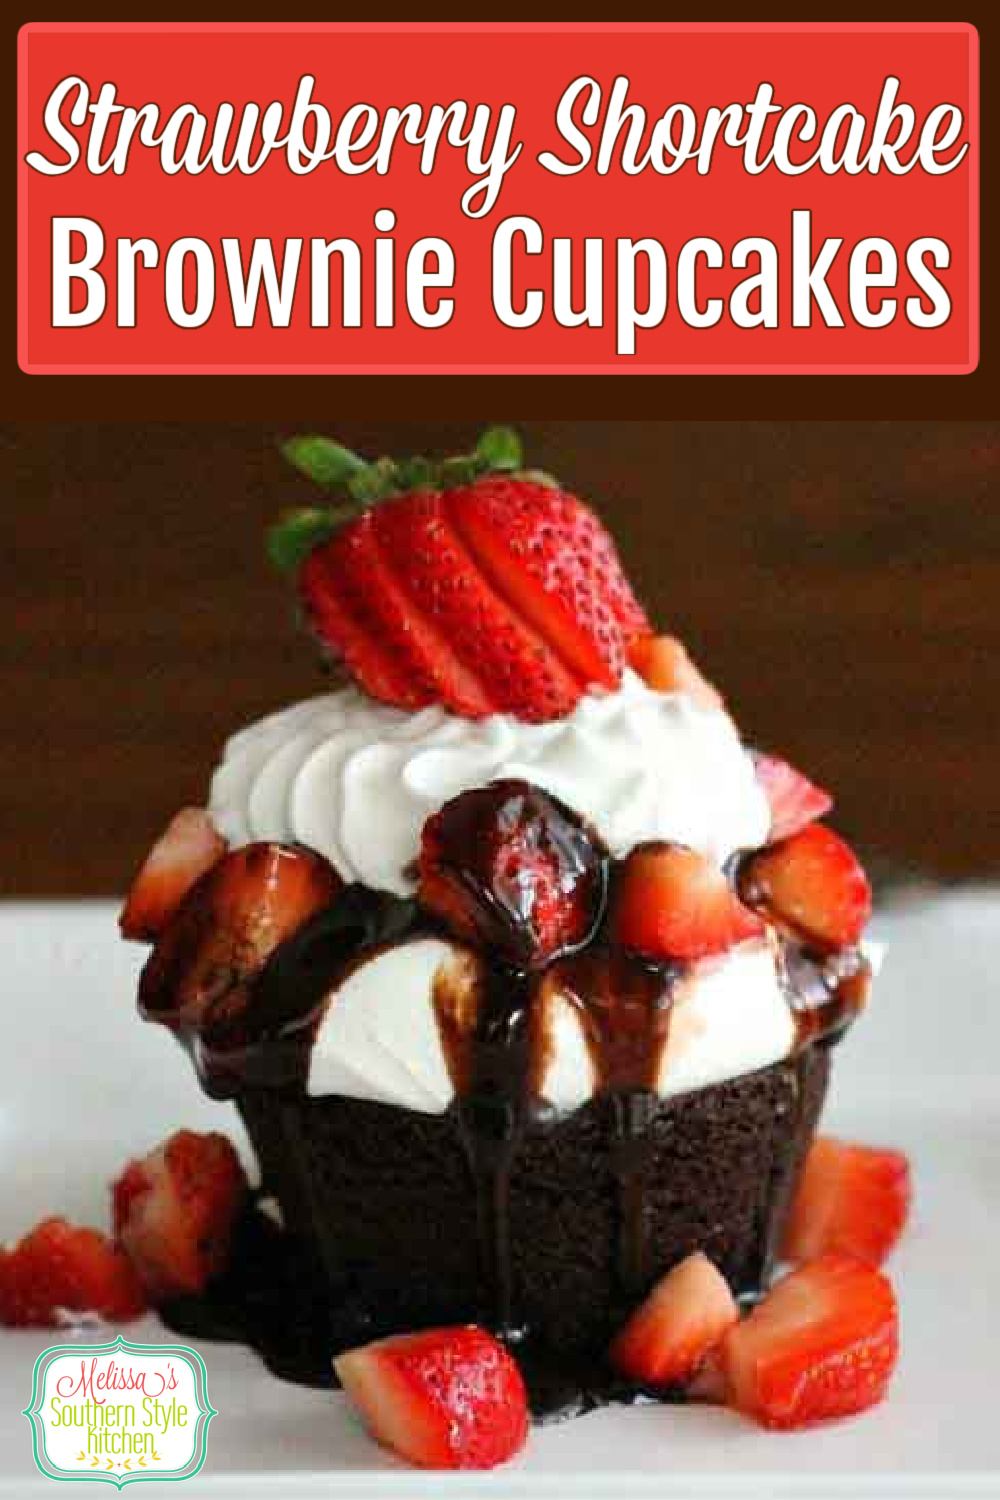 These easy-to-make individual Strawberry Shortcake Brownie Cupcakes are sure to satisfy your sweets craving. #brownies #browniecupcakes #strawberryshortcake #strawberries #chocolate #strawberry #dessert #dessertfoodrecipes #southernfood #southernrecipes via @melissasssk